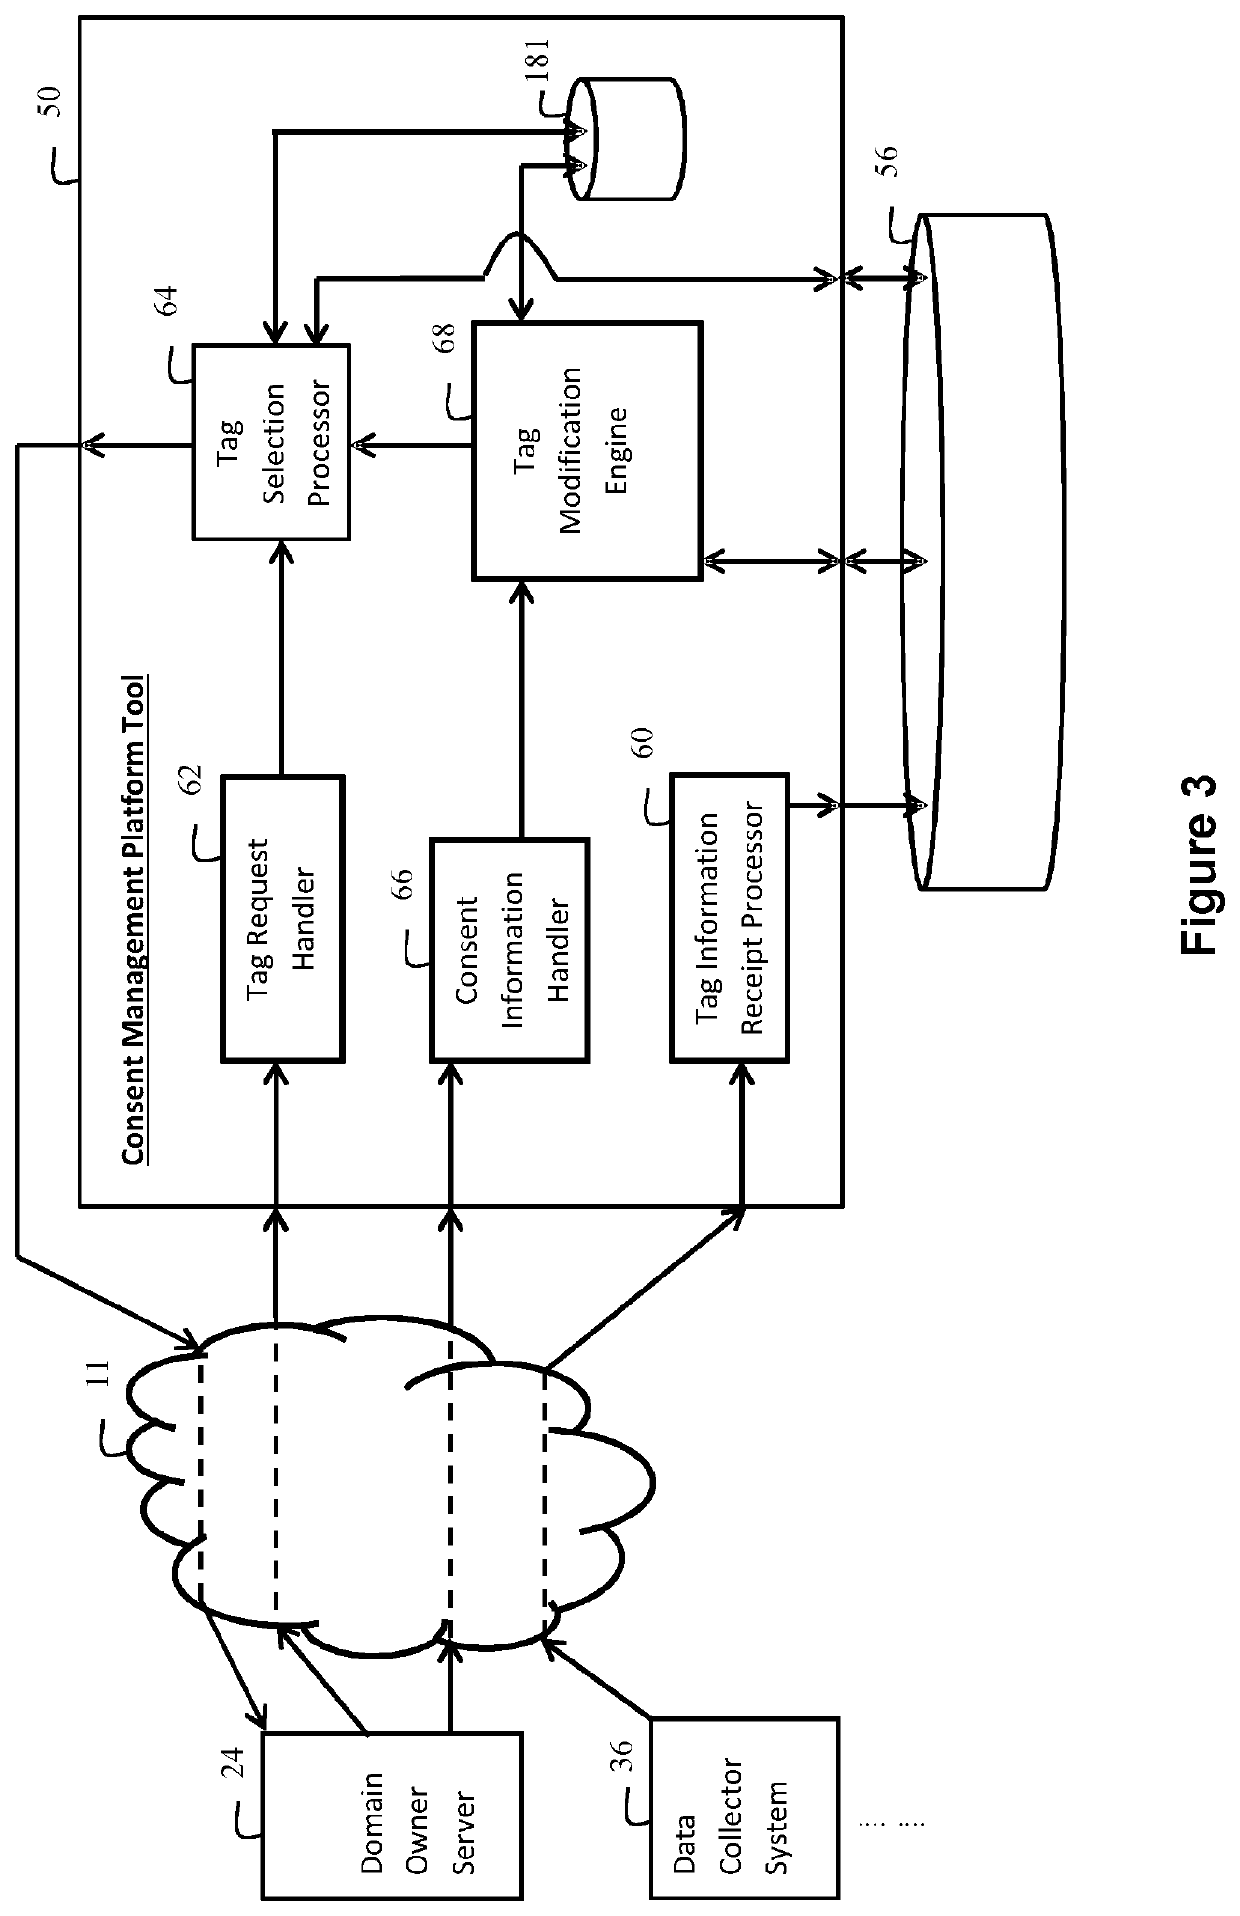 System for controlling user interaction via an application with remote servers